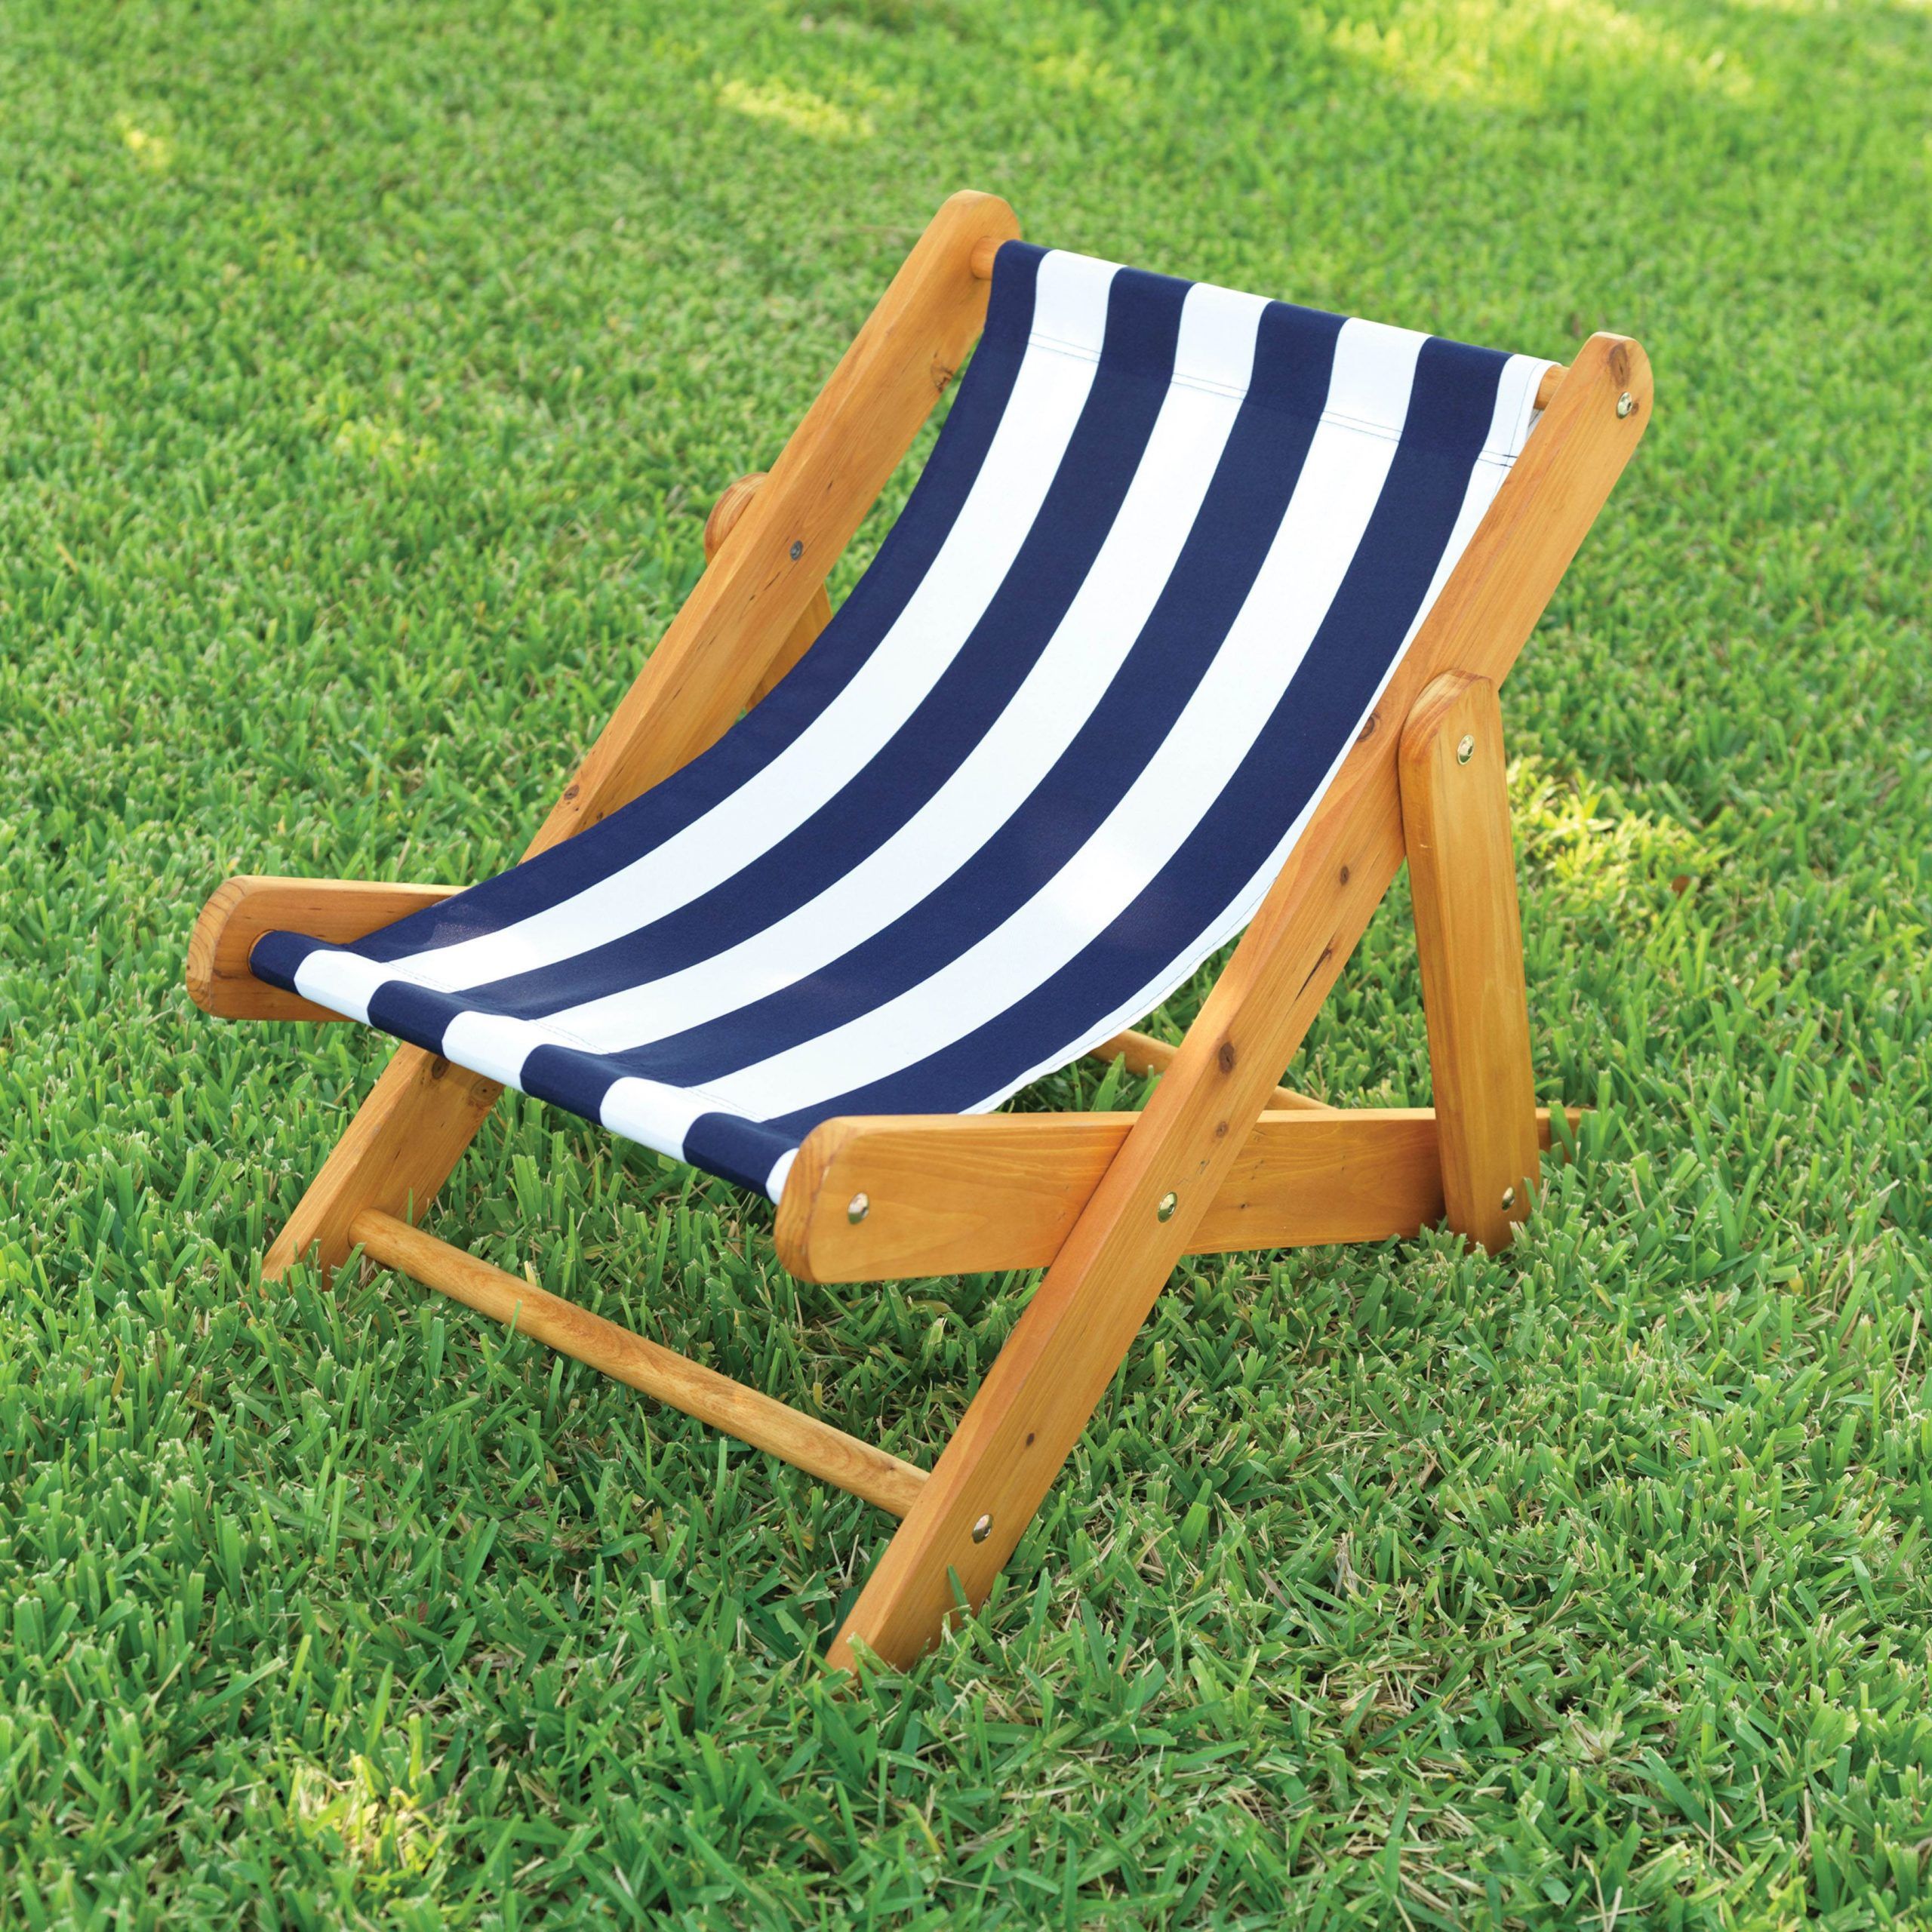 Kidkraft Outdoor Sling Chair With Navy Stripe Fabric – 102 – Walmart In Most Up To Date Navy Outdoor Seating Sets (View 4 of 15)